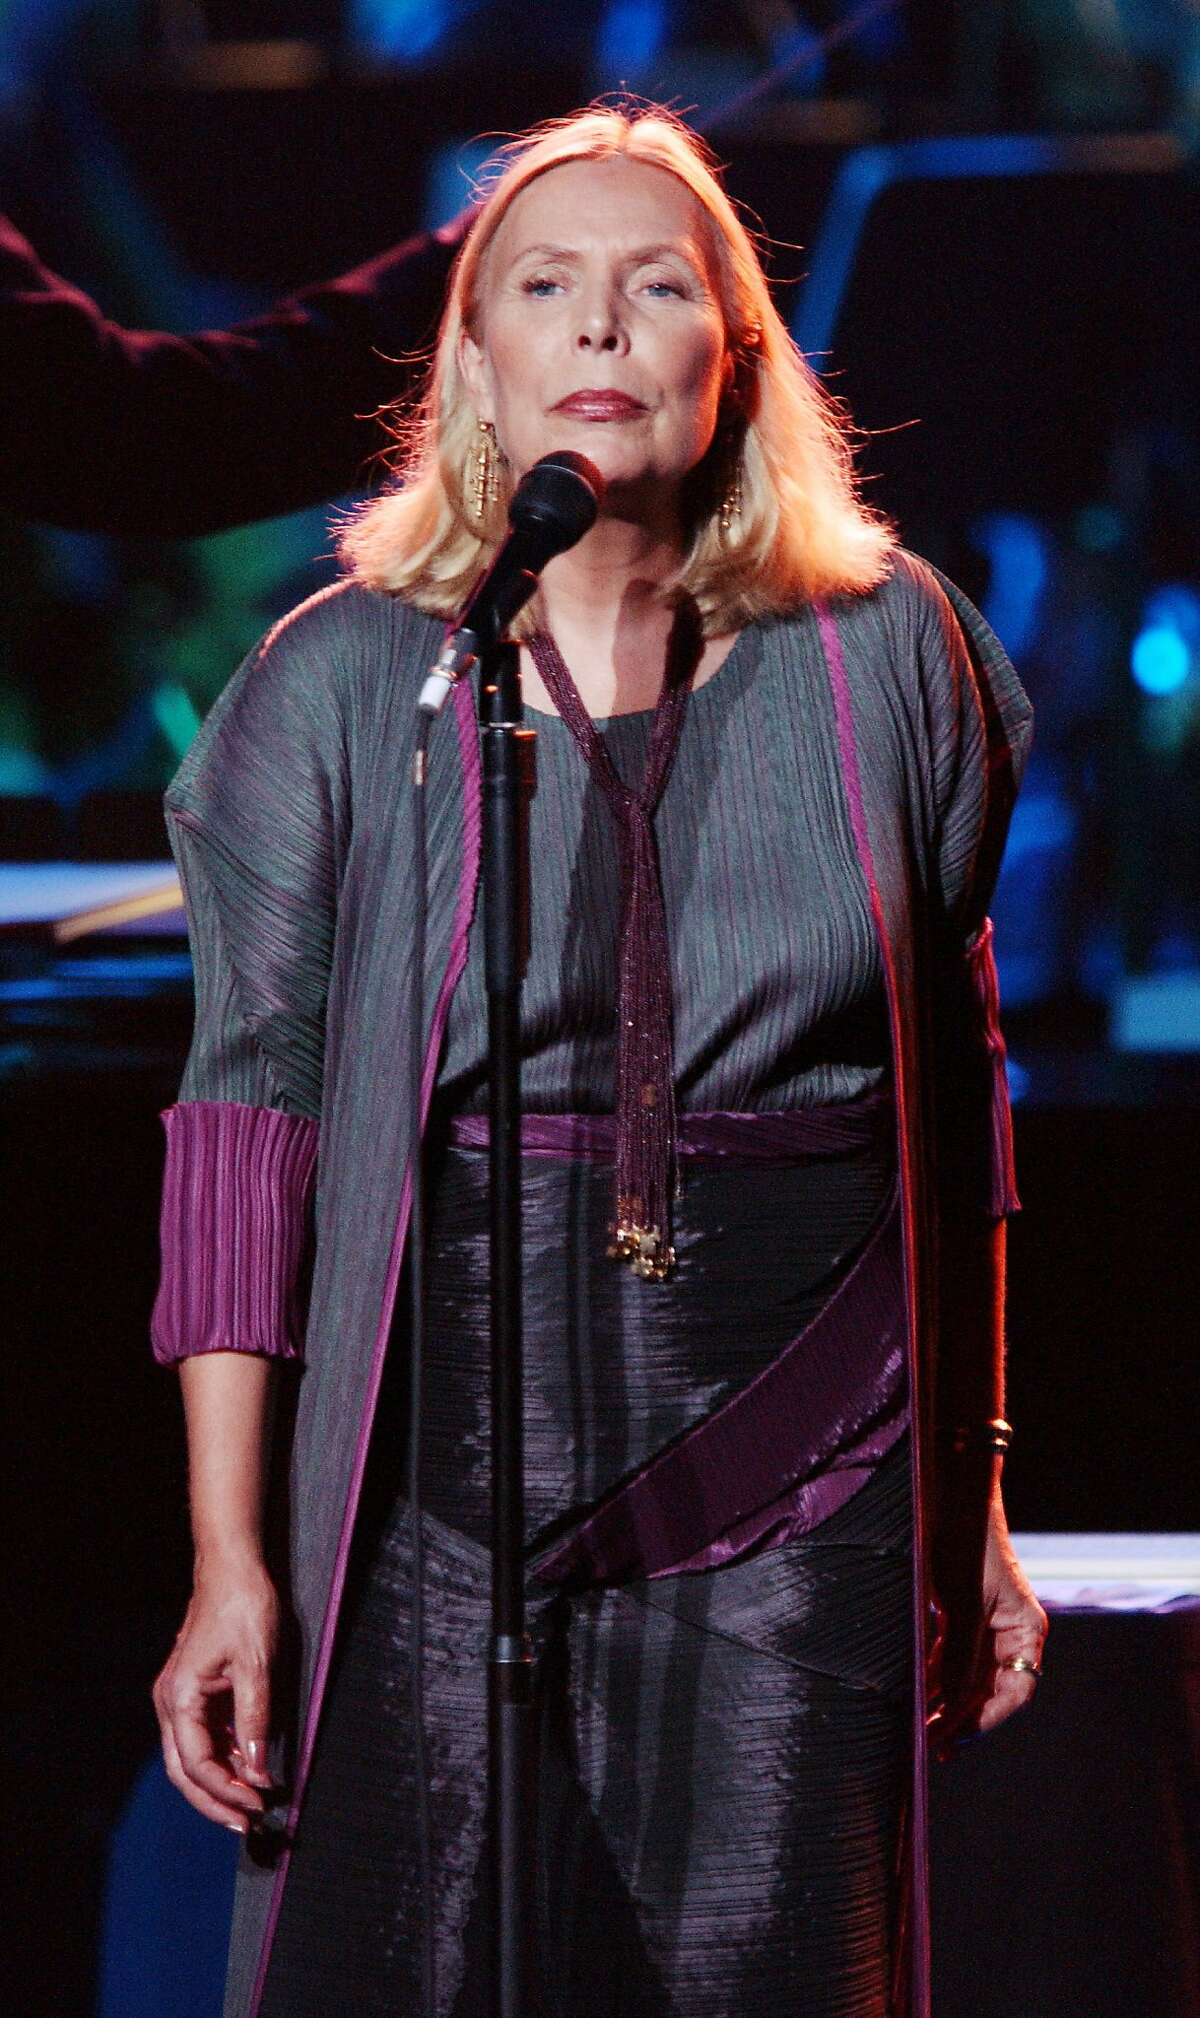 FILE MARCH 31, 2015: According to reports, singer Joni Mitchell was found unconscious at her home in Bel-Air, California on March 31, 2015 and was taken to the hospital. Mitchell is 71 years old. No further information regarding her health has been released at this time. LOS ANGELES - NOVEMBER 13: Recording Artist Joni Mitchell performs at the "Stormy Weather 2002" concert at the Wiltern Theatre on November 13, 2002 in Los Angeles, California. The annual event benefits the Walden Woods Project and the Thoreau Institute at Walden Pond. (Photo by Robert Mora/Getty Images)